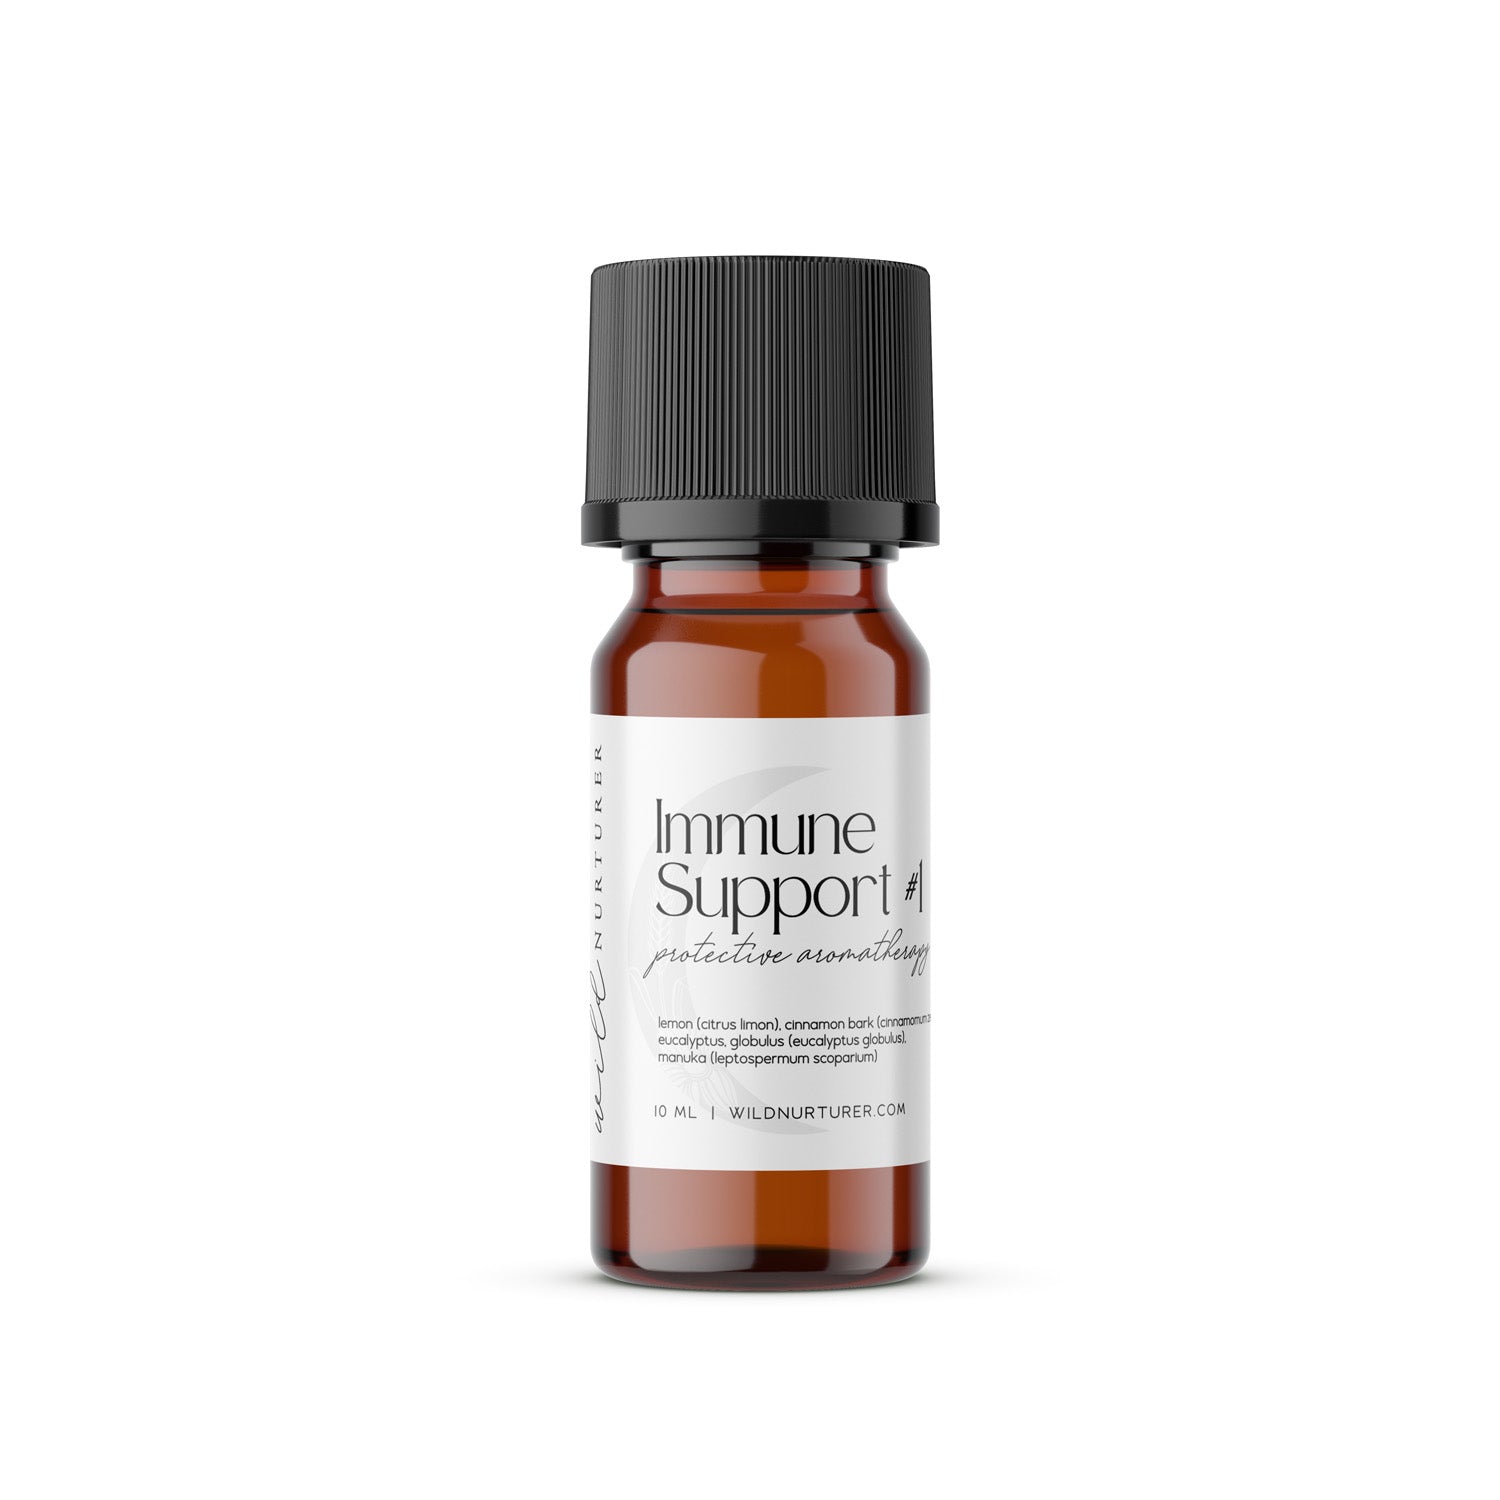 Four bottles of Wild Nurturer Aromatherapy's Immune Support Collection, labeled "immune support" 1 through 4, each containing 1 fl. oz of wild natural essential oil, arranged in a row on a white background.